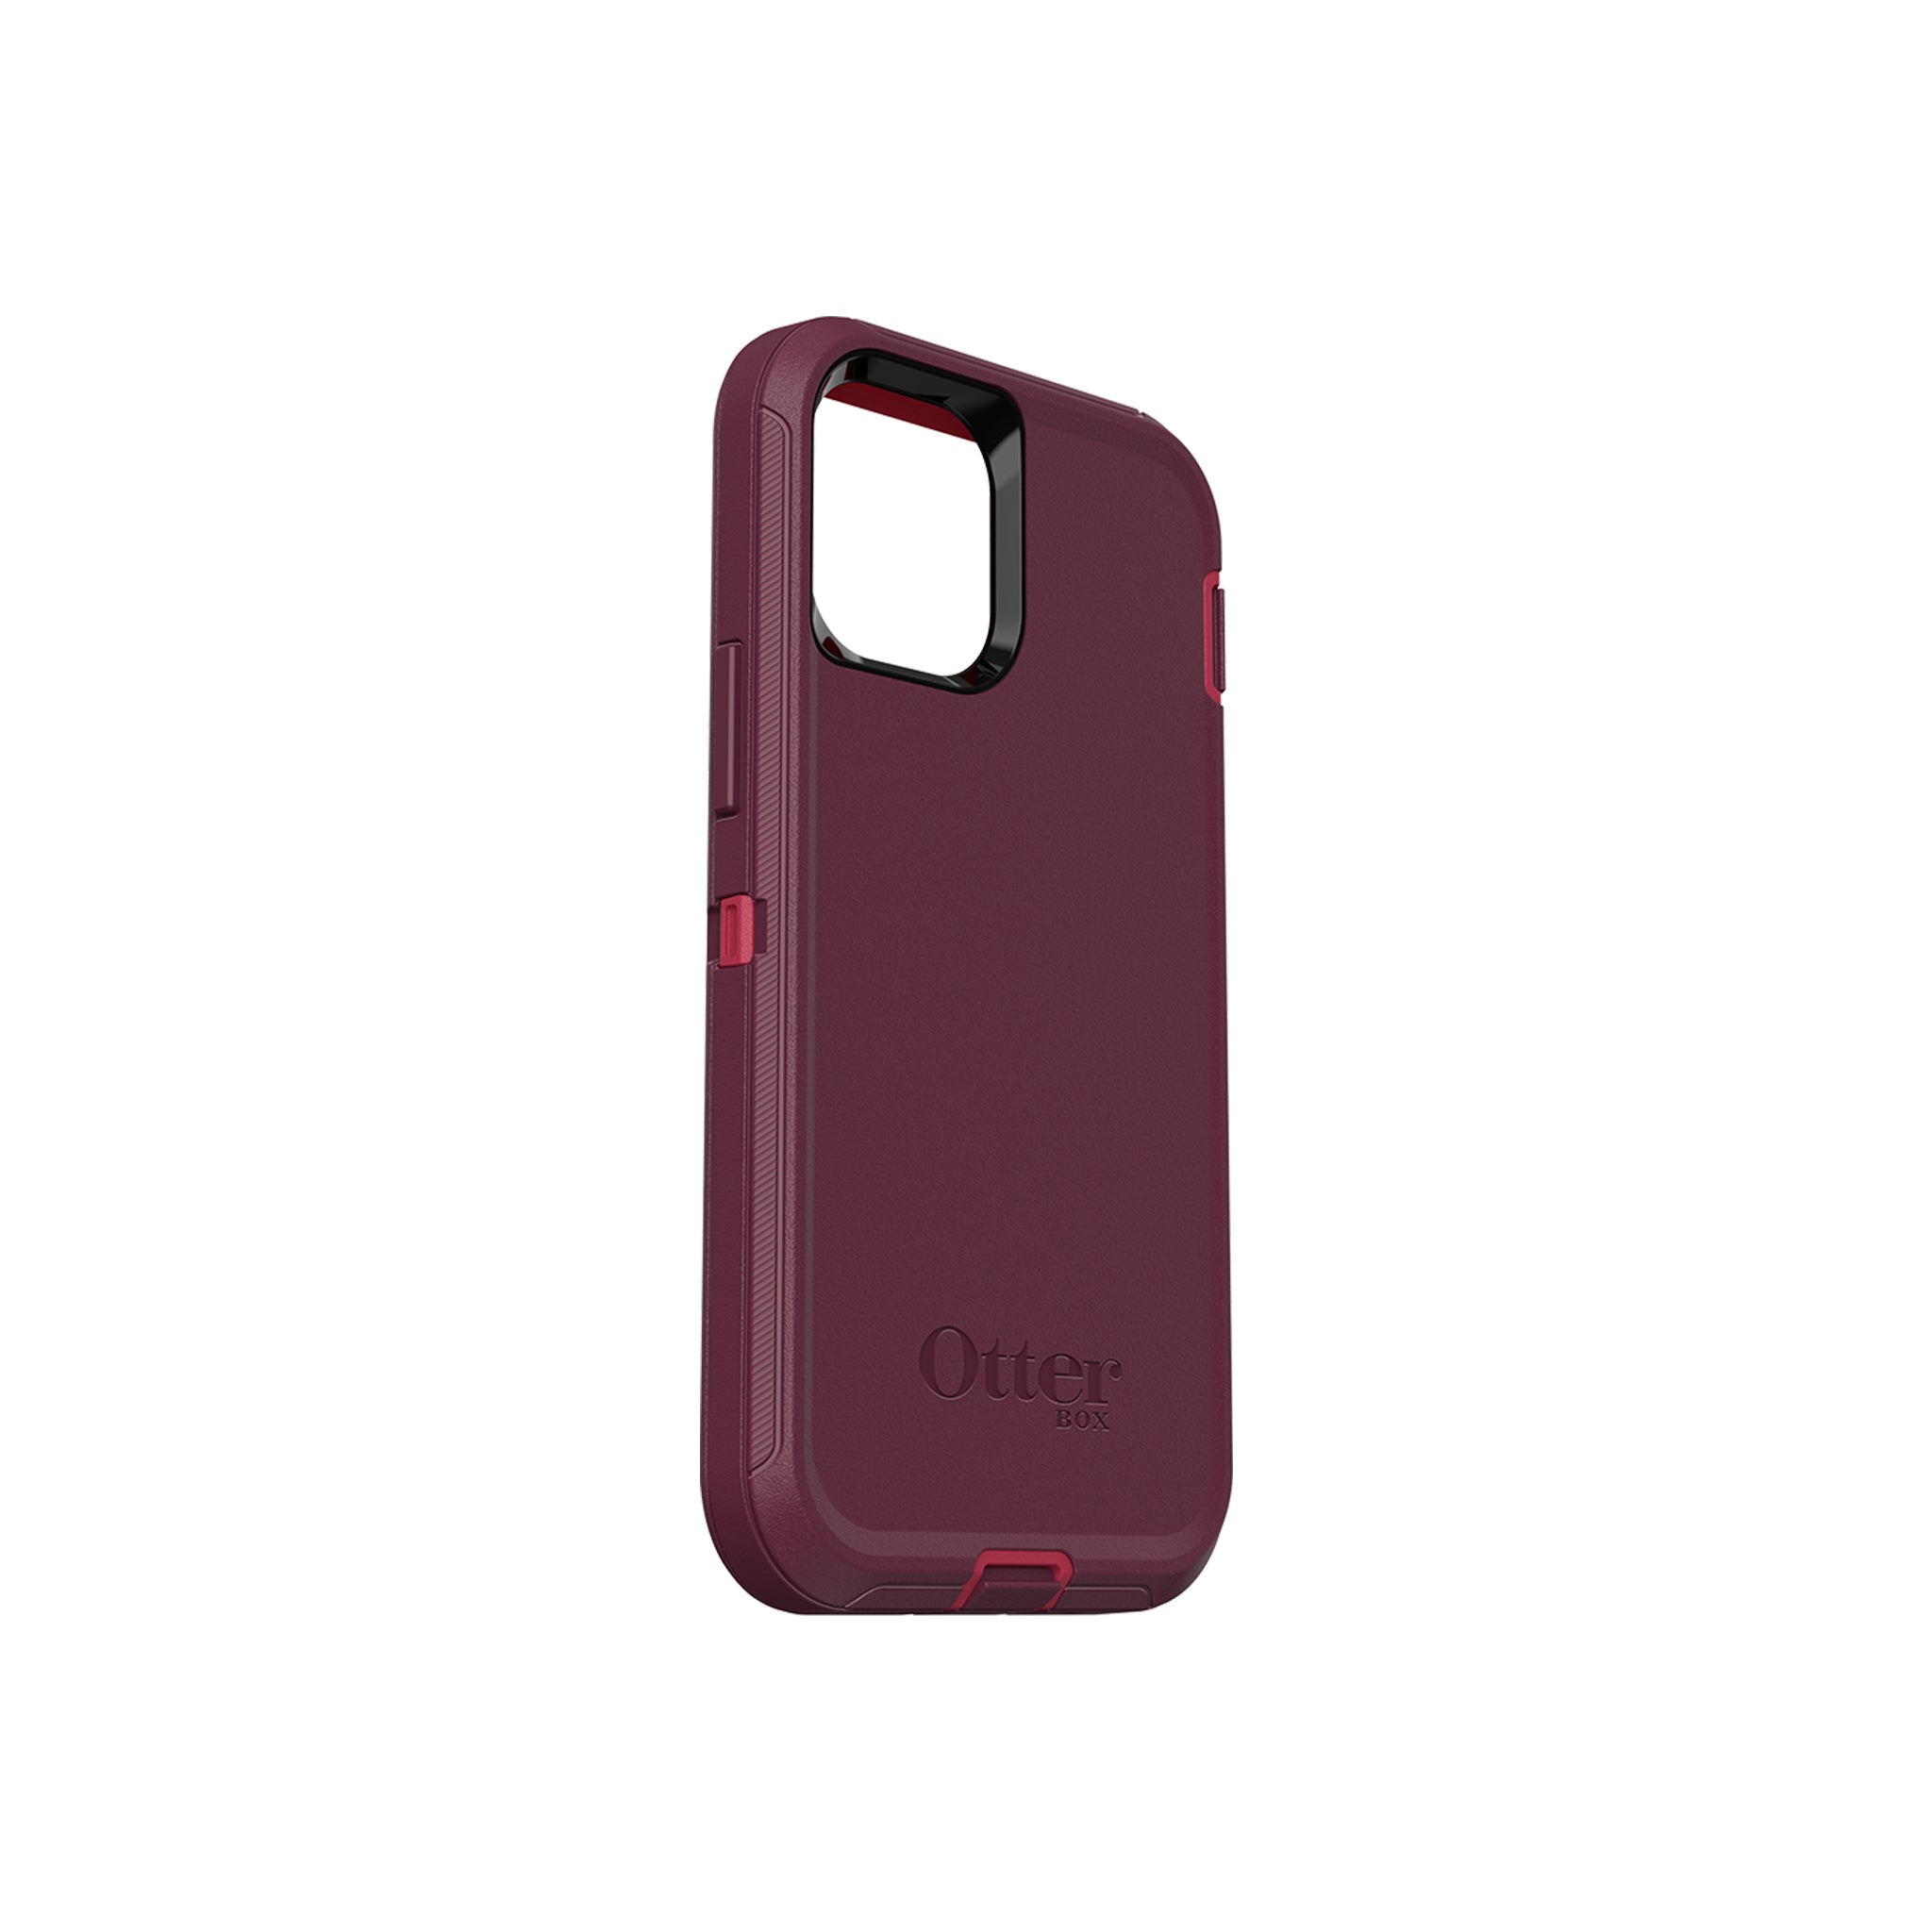 OtterBox - Defender for iPhone 12 mini - Berry Potion